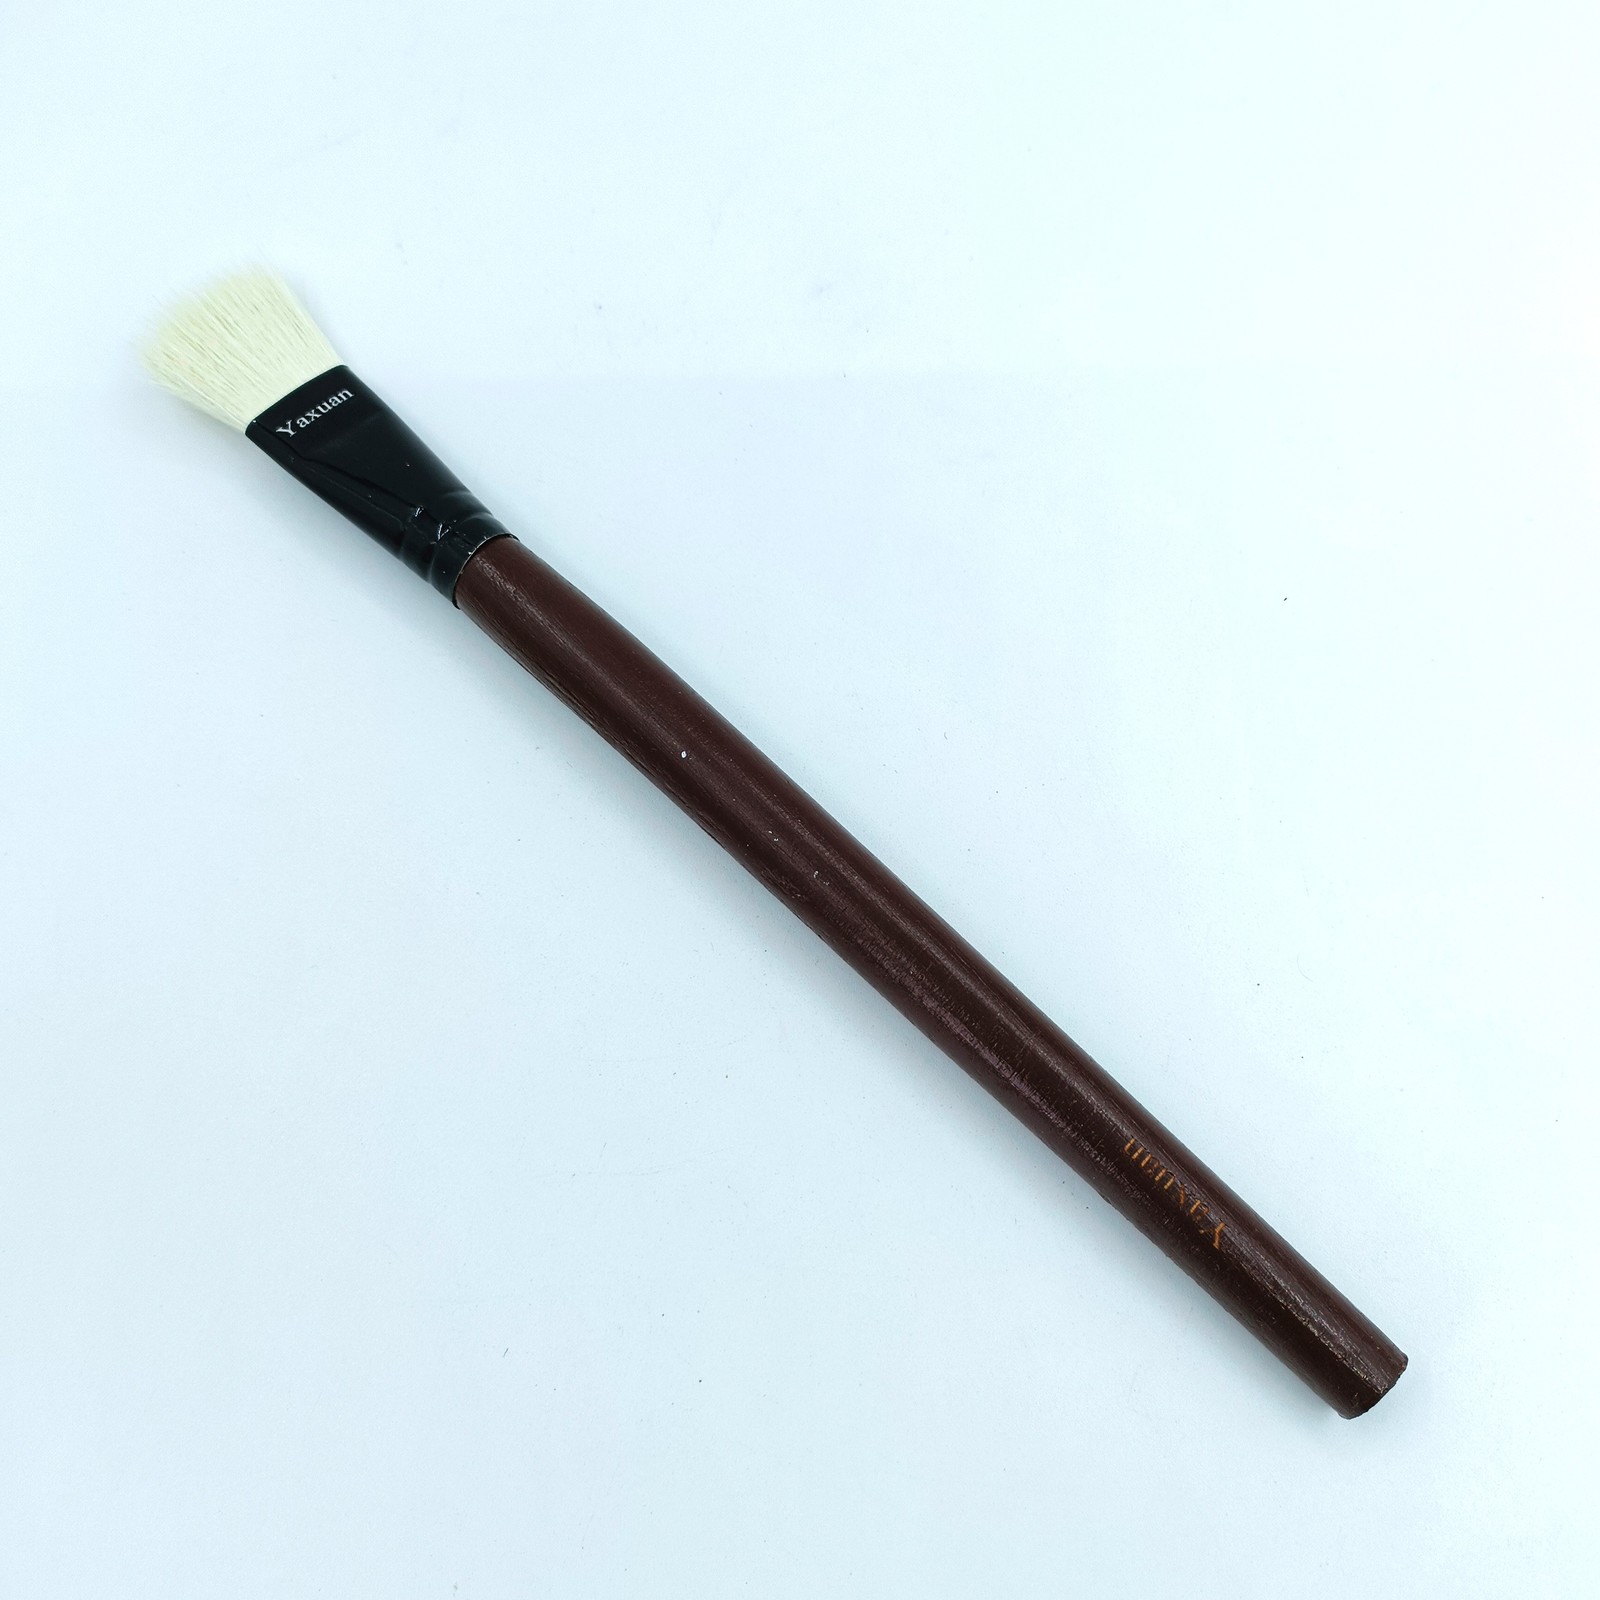 Primary image for Yaxuan Drawing Brushes Paintbrushes for Acrylic Oil Watercolor Gouache Painting